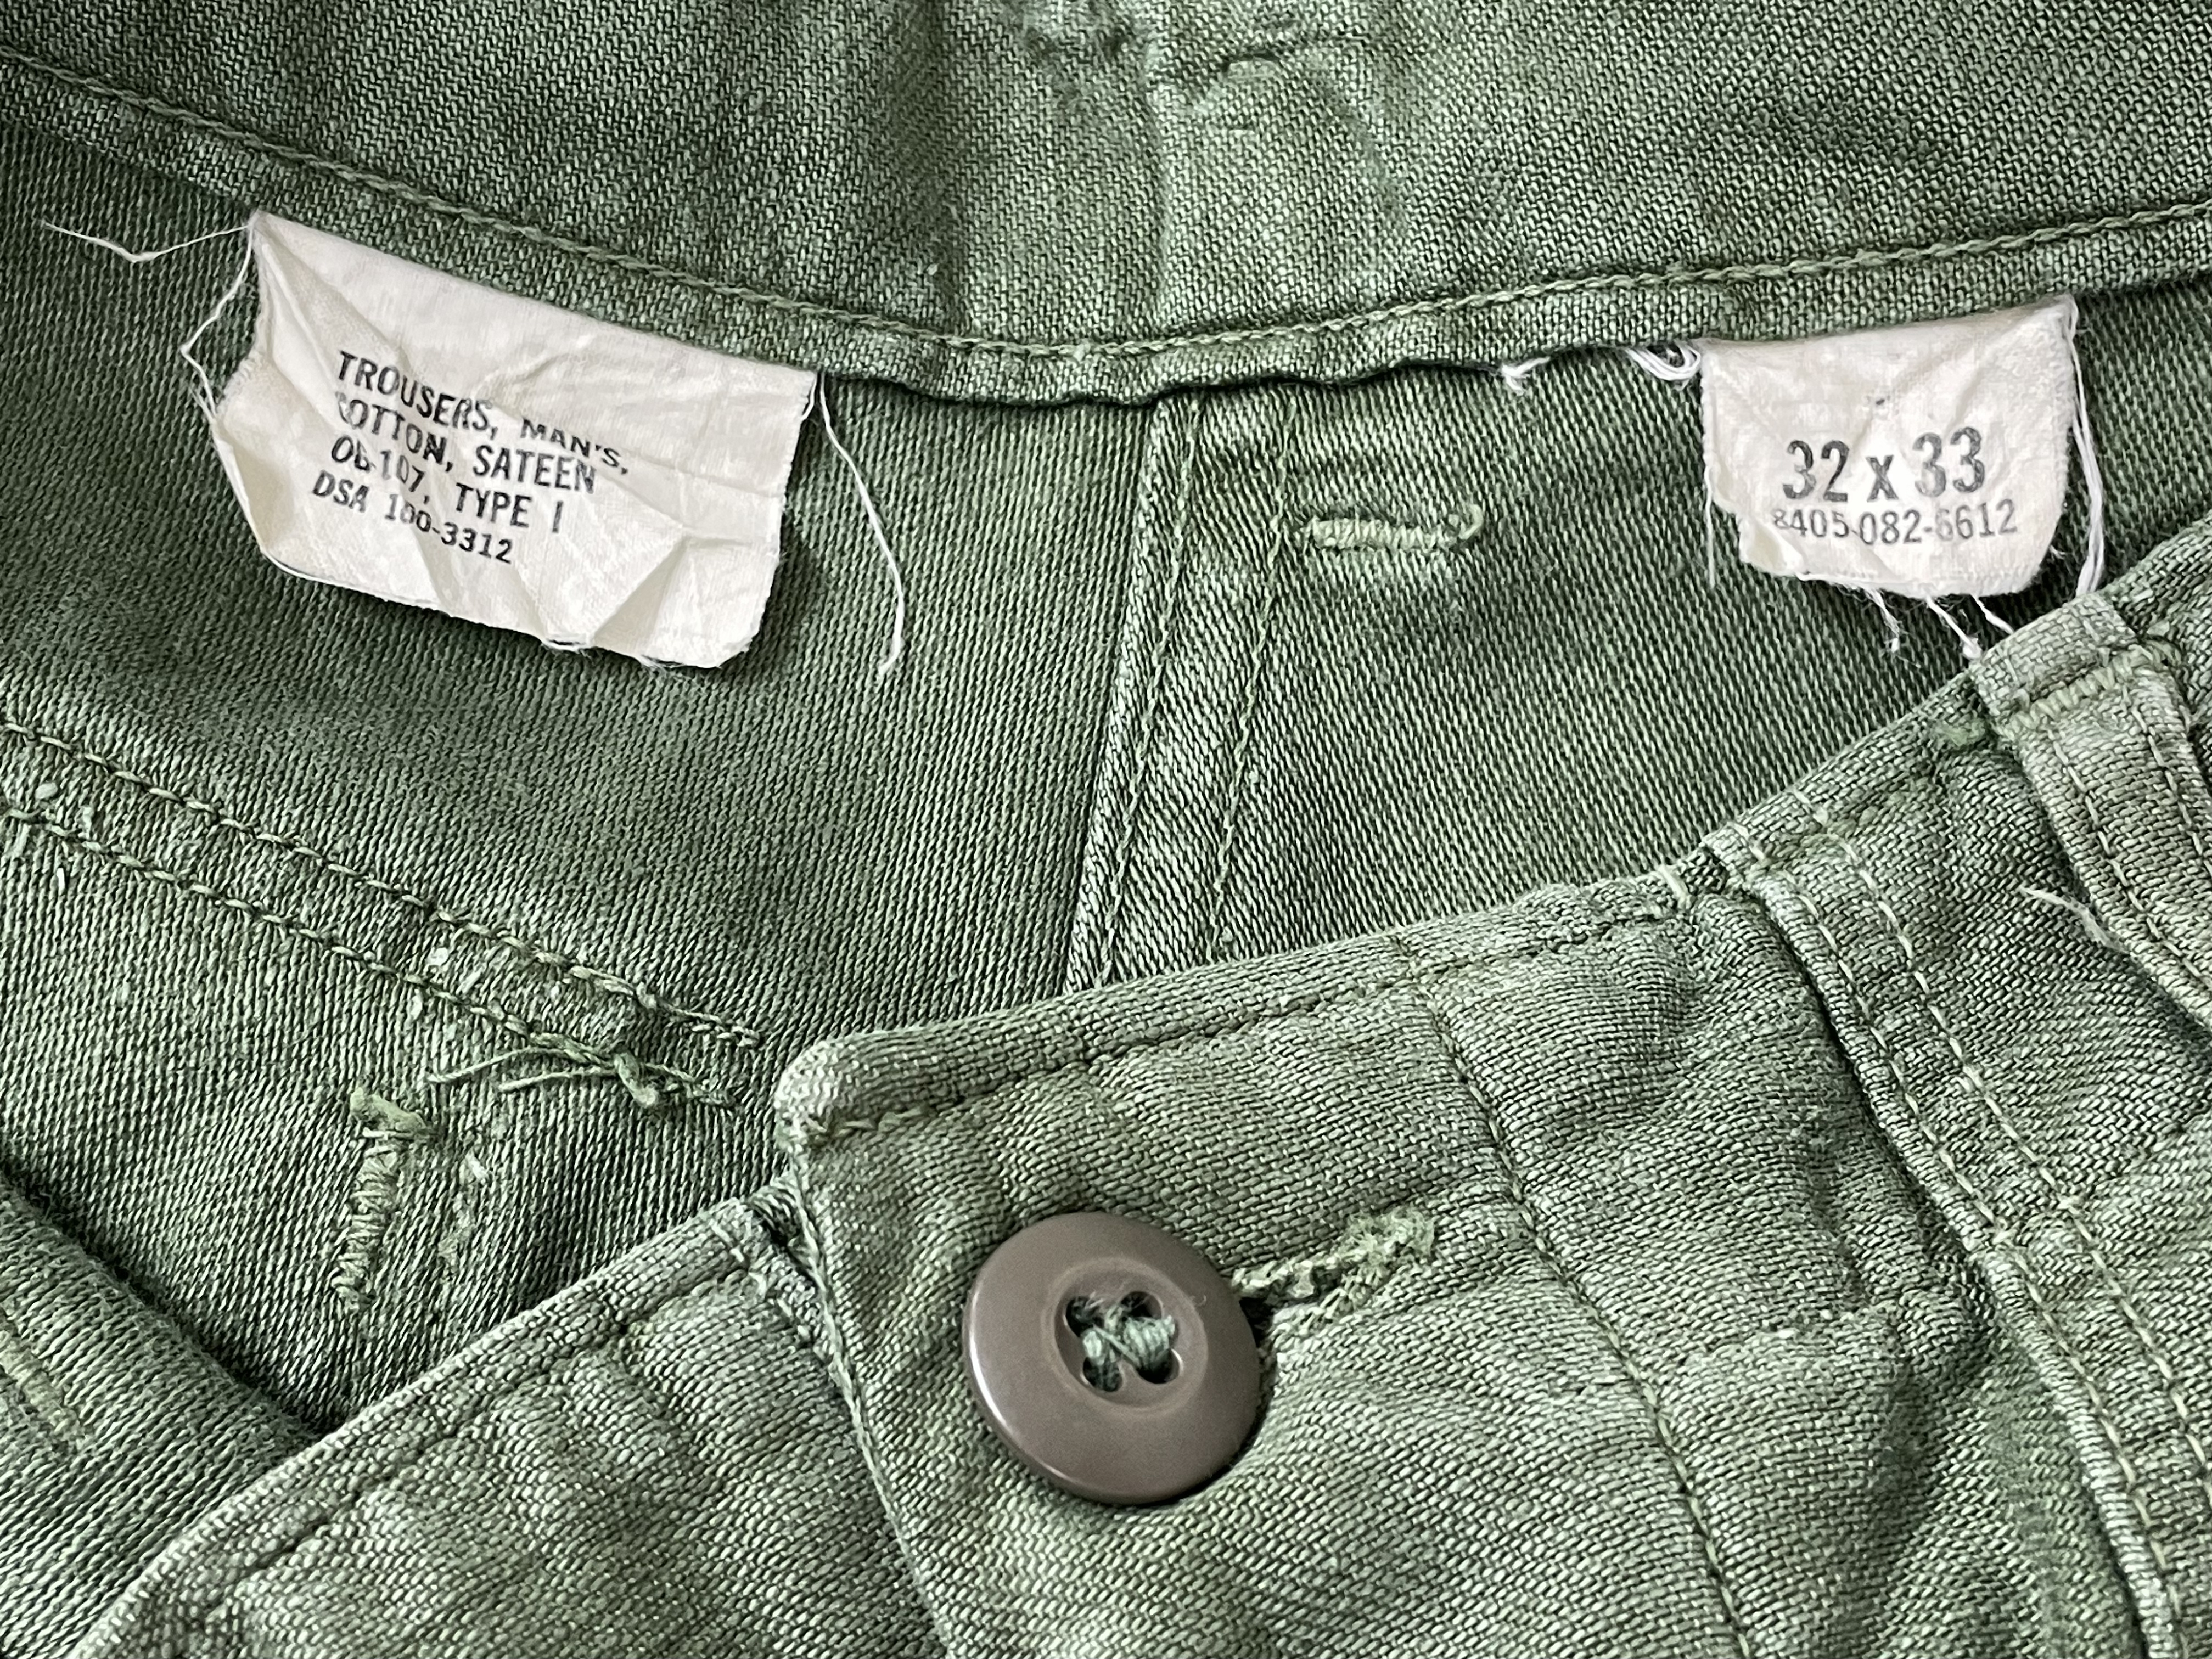 60's 米軍 us army trousers 8405-082-6612 ベイカーパンツ